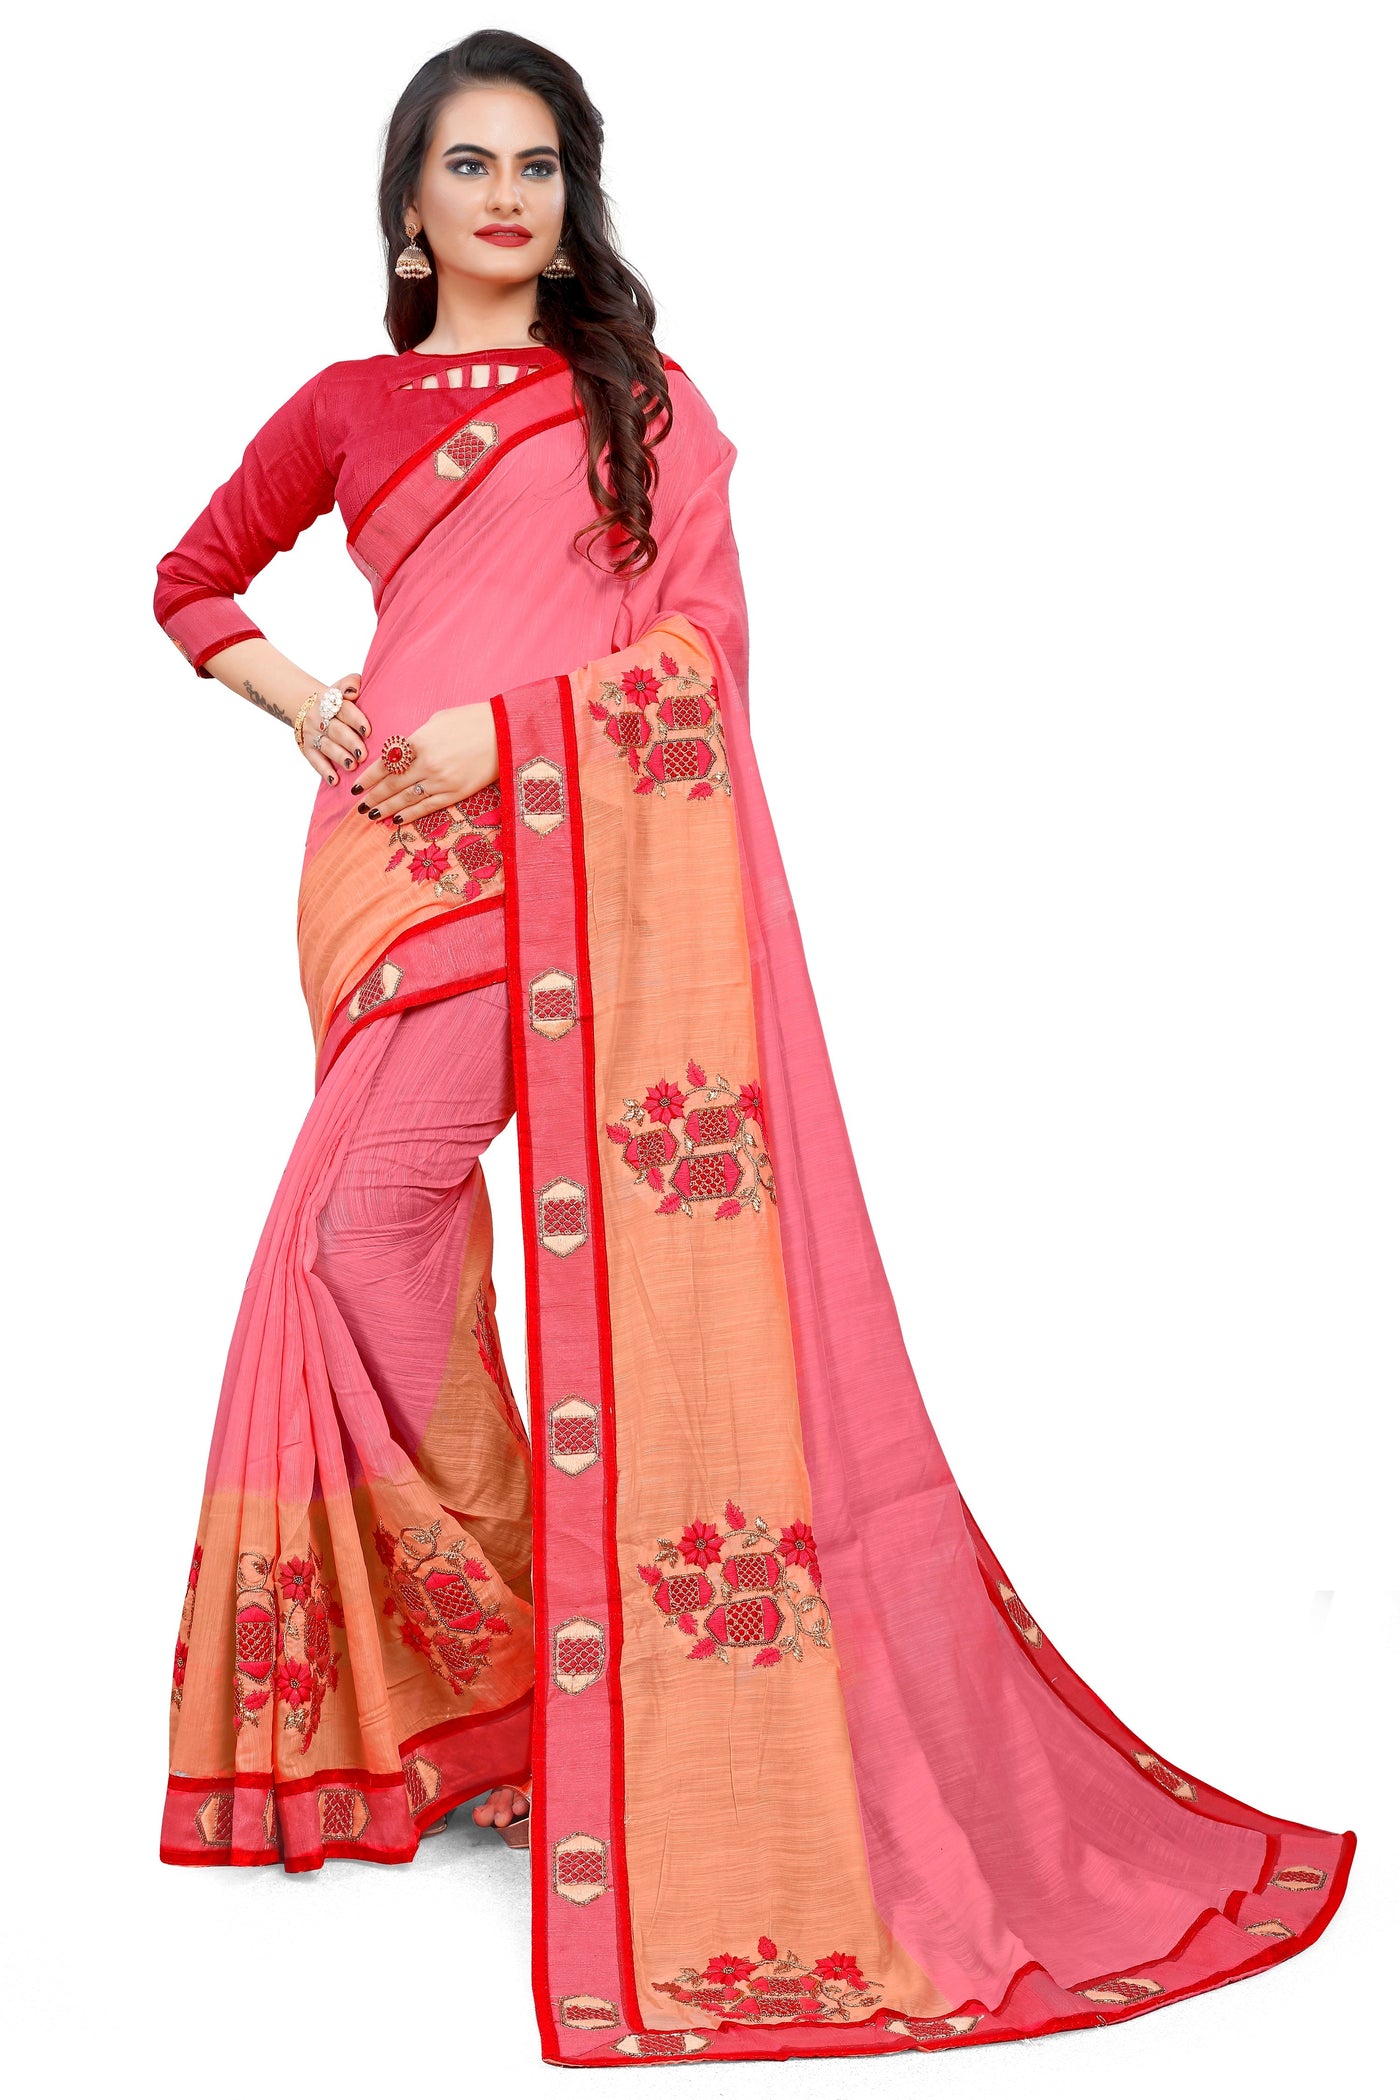 Fancy Cotton Pink Saree With Blouse